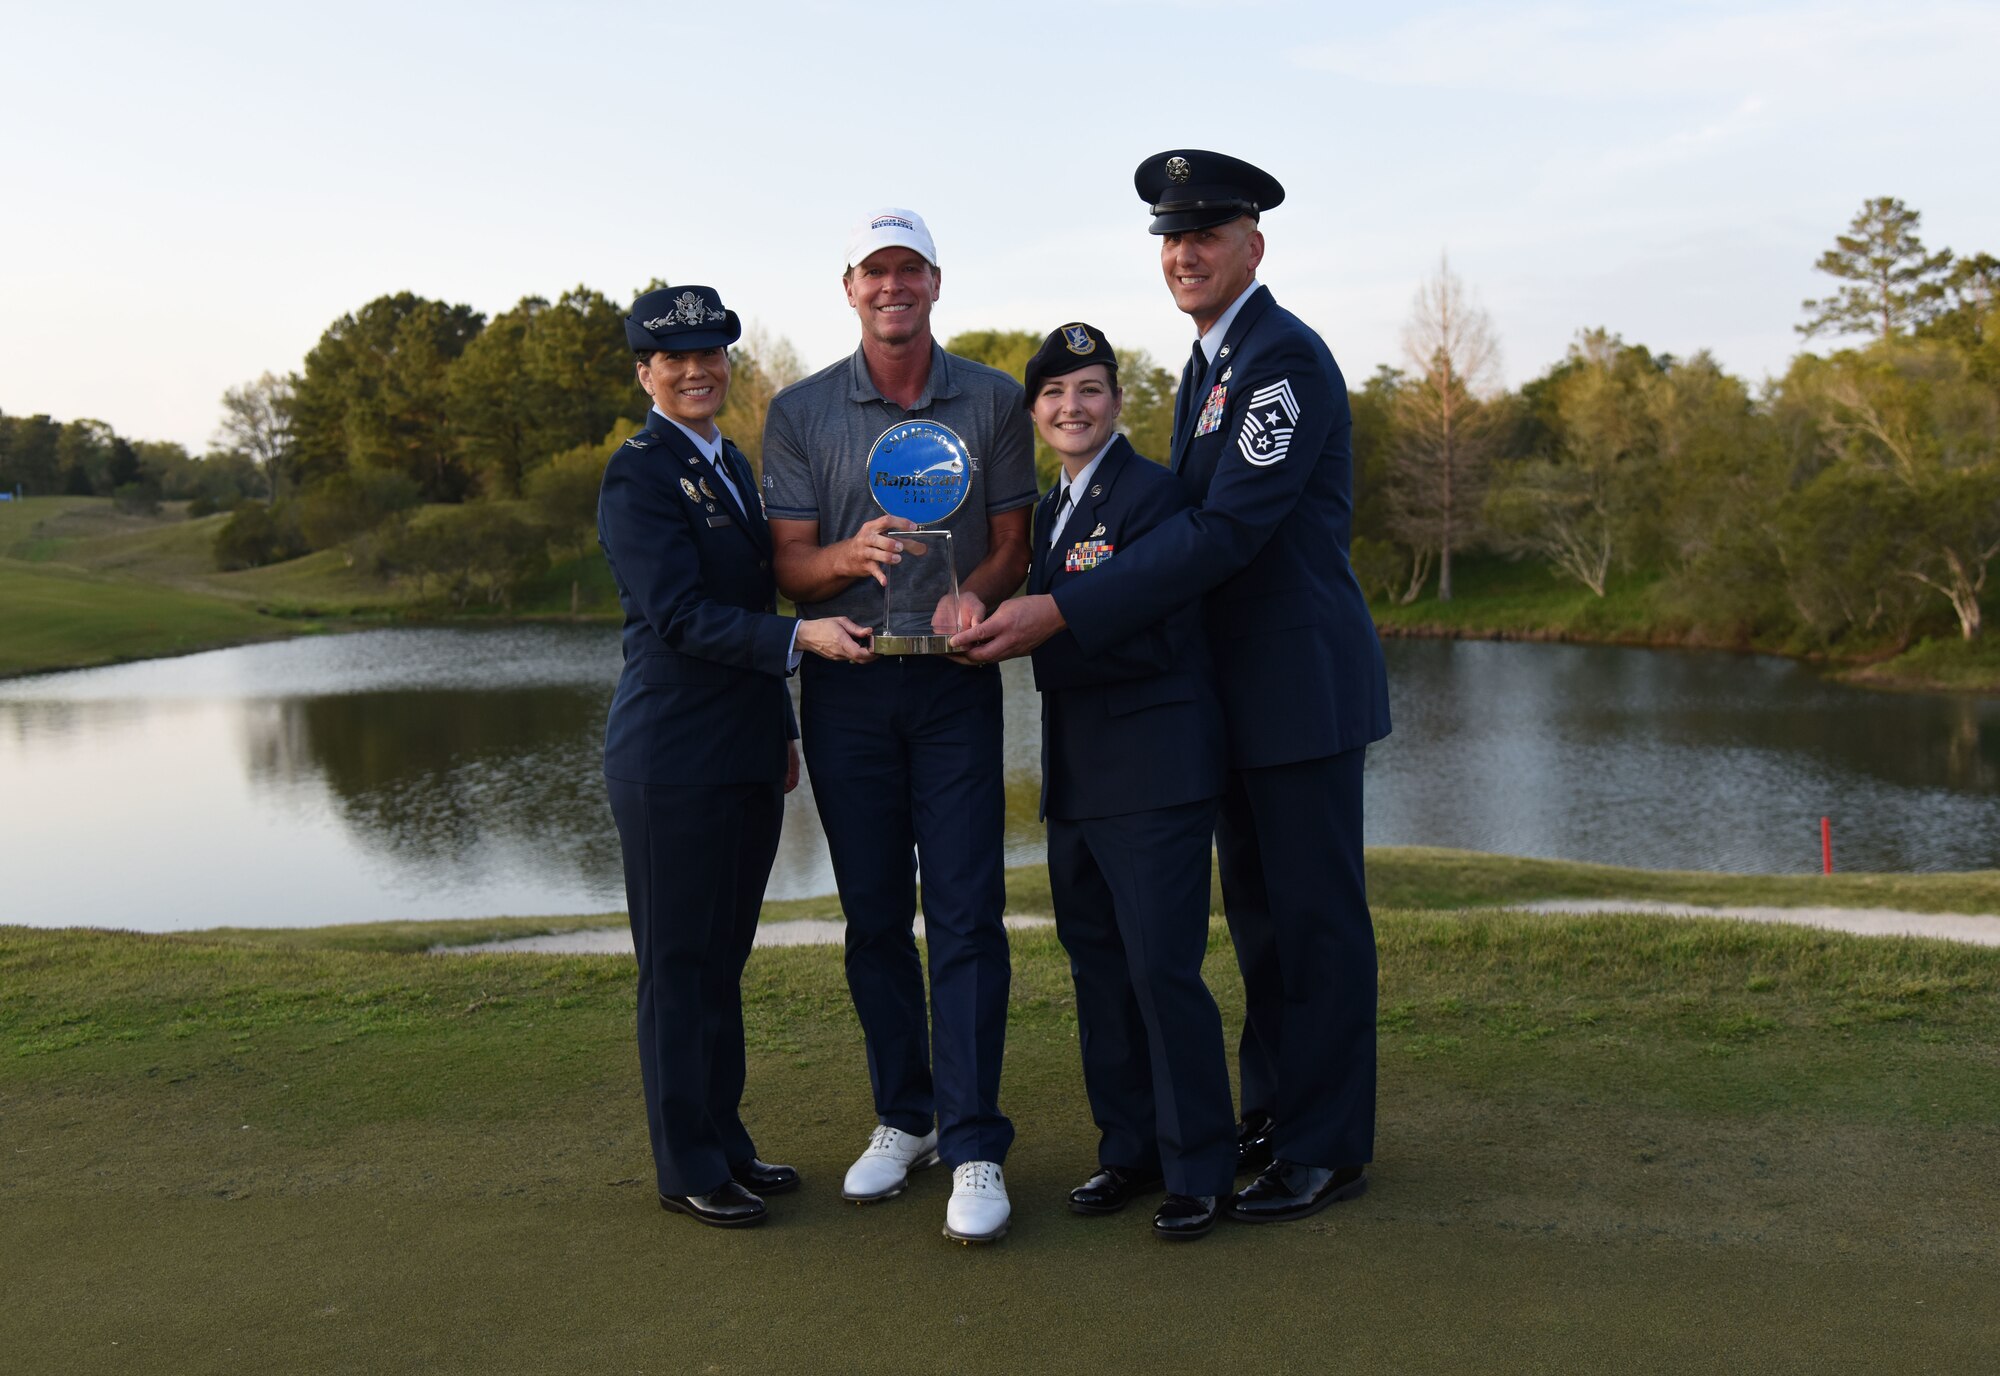 U.S. Air Force Col. Debra Lovette, 81st Training Wing commander, Tech. Sgt. Jennifer Watts, 81st TRW command chief executive assistant, and Chief Master Sgt. Kenneth Carter, Jr., 81st TRW command chief, pose for a photo with Steve Stricker, Professional Golfers’ Association golfer, after winning the Rapiscan Systems Classic Champions Tour at Fallen Oak Golf Club March 25, 2018, in Saucier, Mississippi. Keesler personnel performed the national anthem and presented the colors during the closing ceremony of the three-day event. (U.S. Air Force photo by Kemberly Groue)